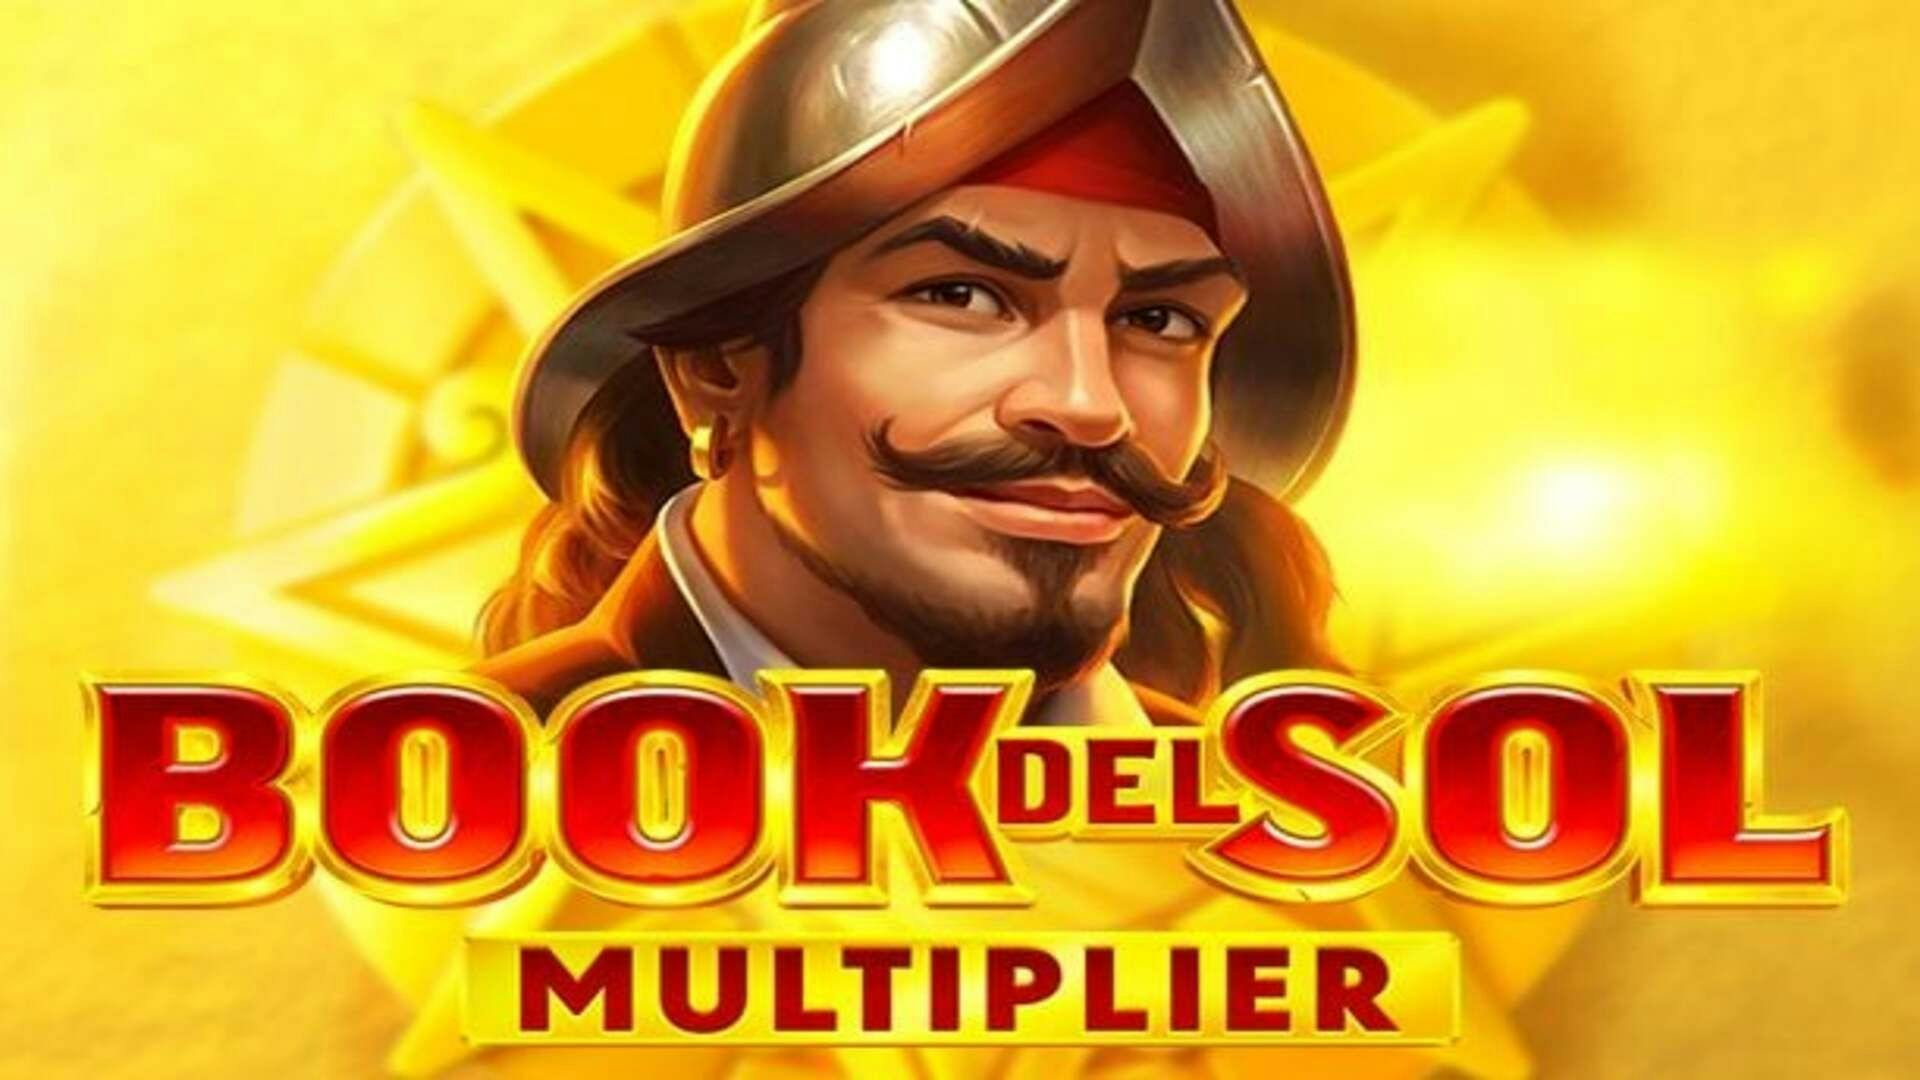 Slot Machine Book del Sol Multiplier Free Game Play